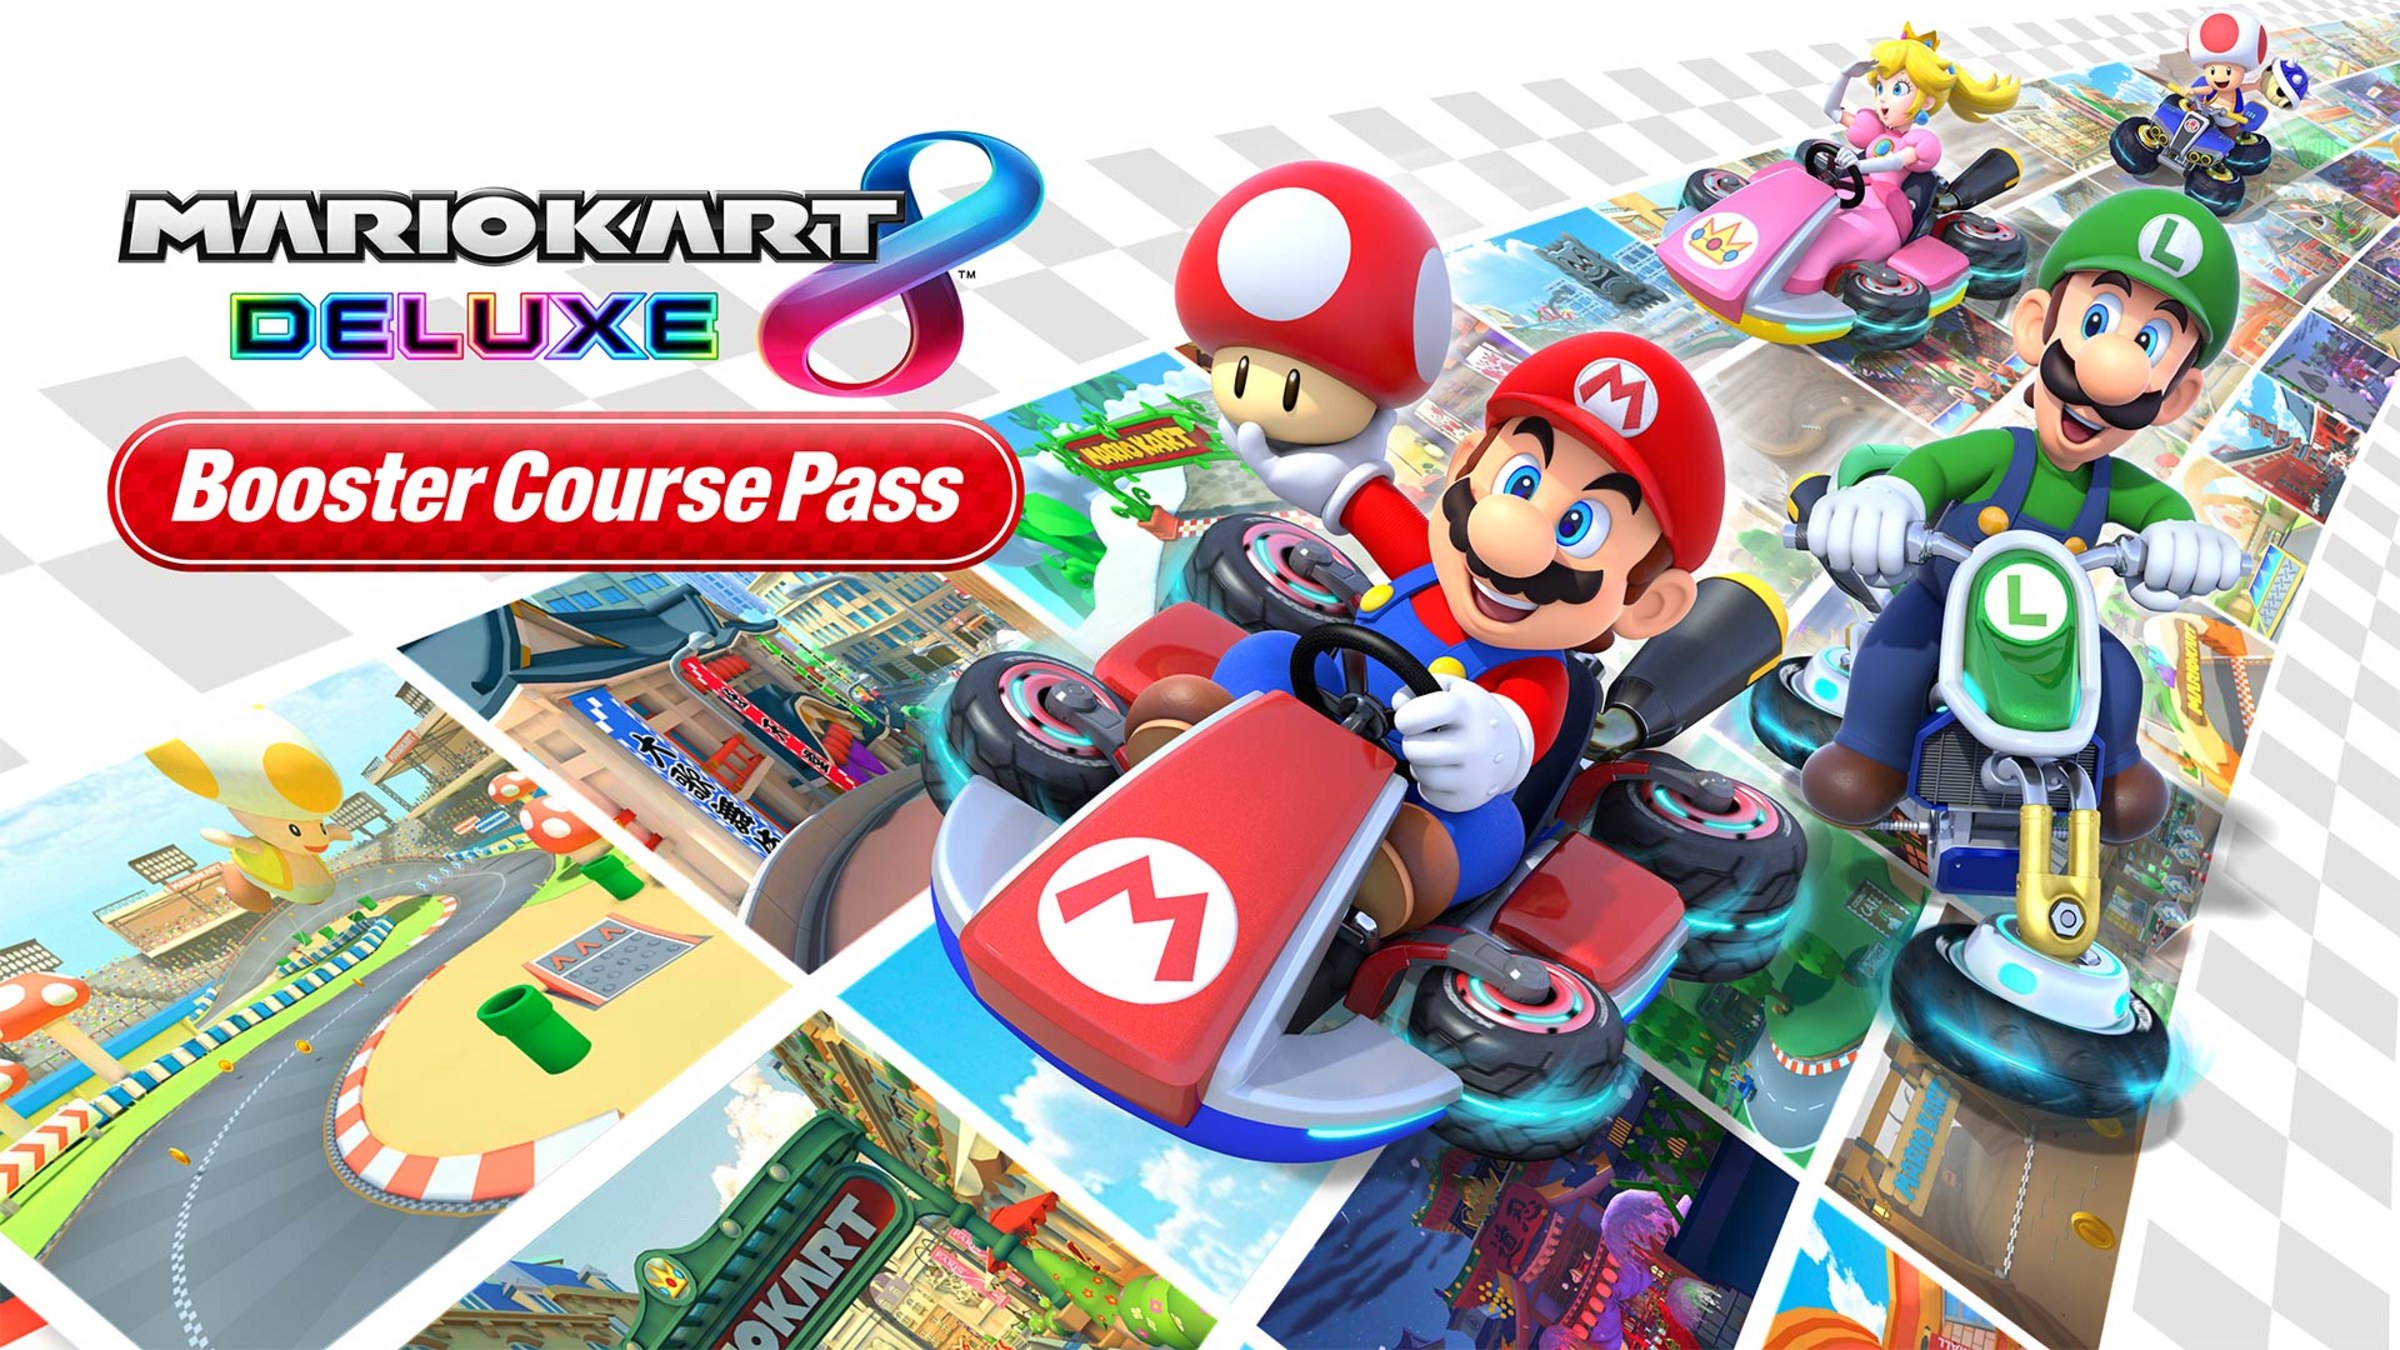 Laboratorium Interesse Forfærde Mario Kart™ 8 Deluxe – Booster Course Pass for Nintendo Switch - Nintendo  Official Site